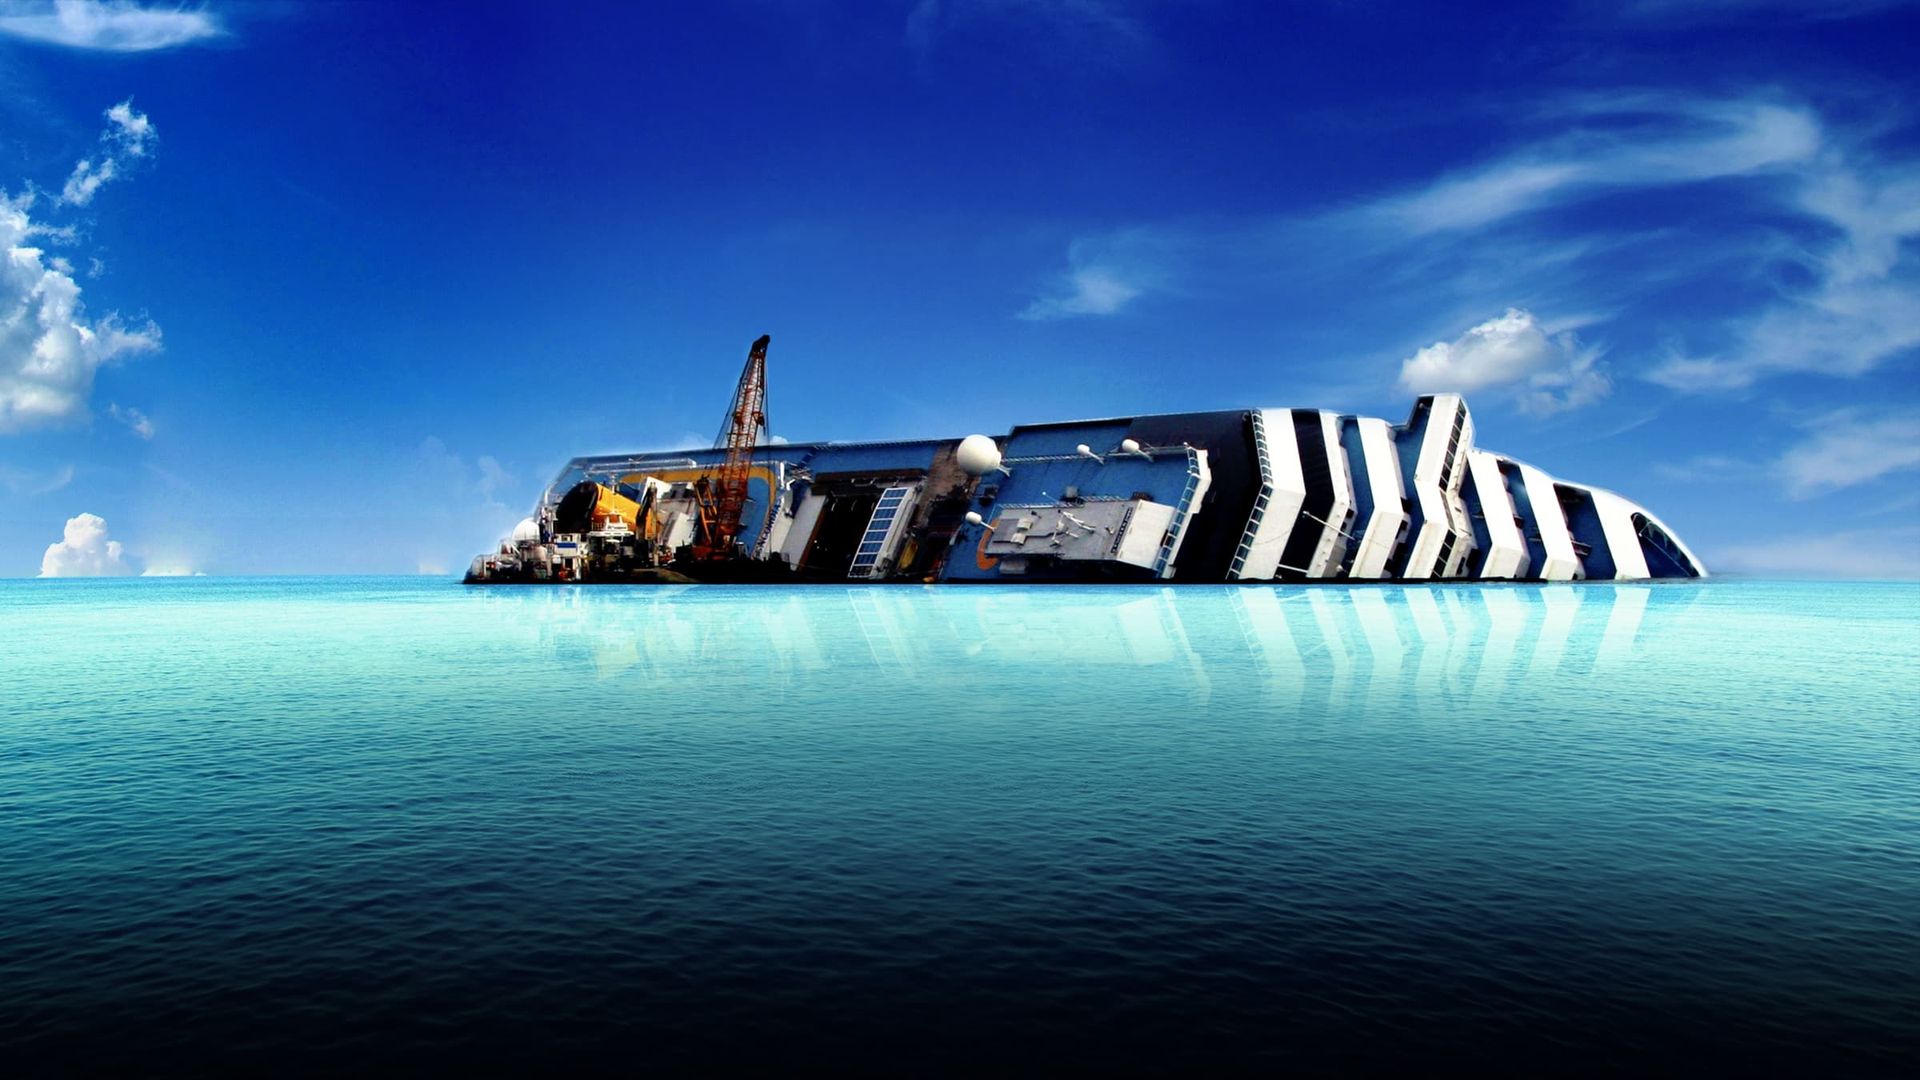 Costa Concordia Disaster: One Year On background